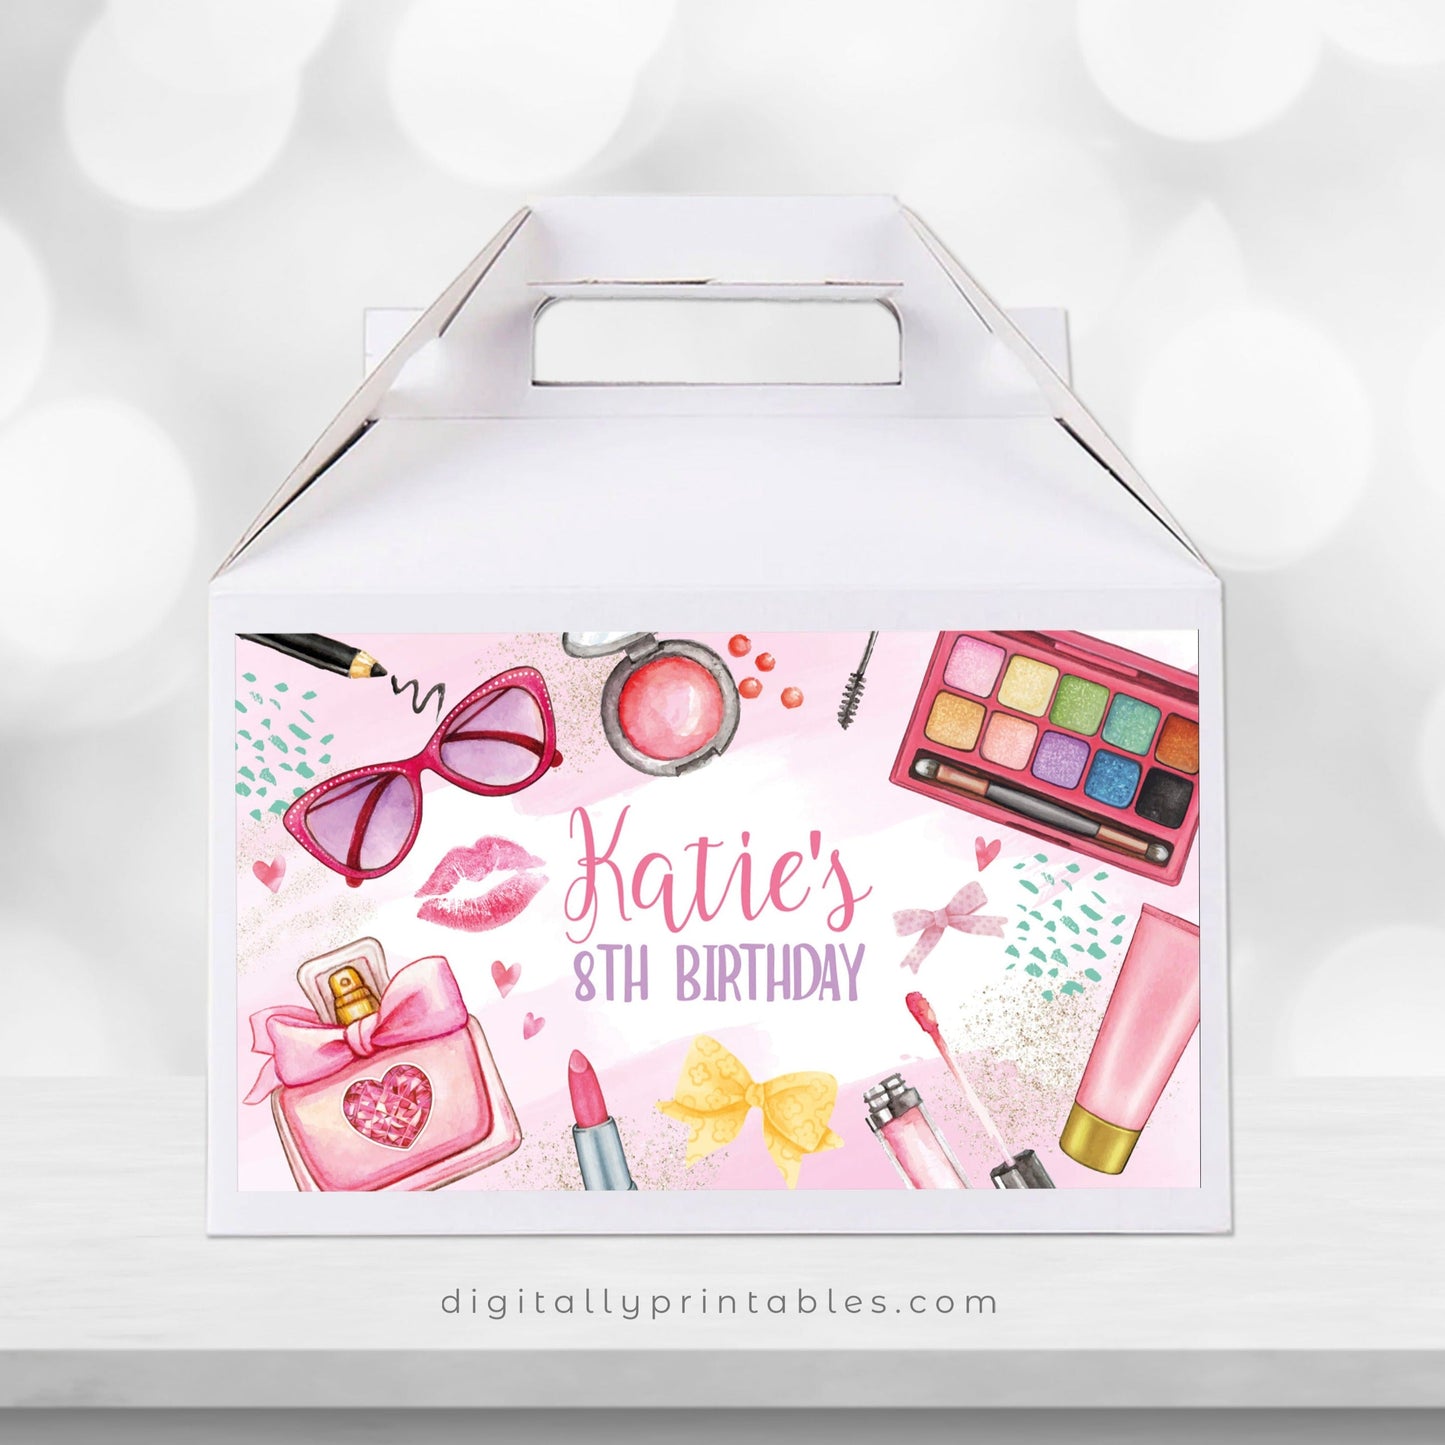 Glitz and Glam Gable Box Label ★ Instant Download | Editable Text - Digitally Printables